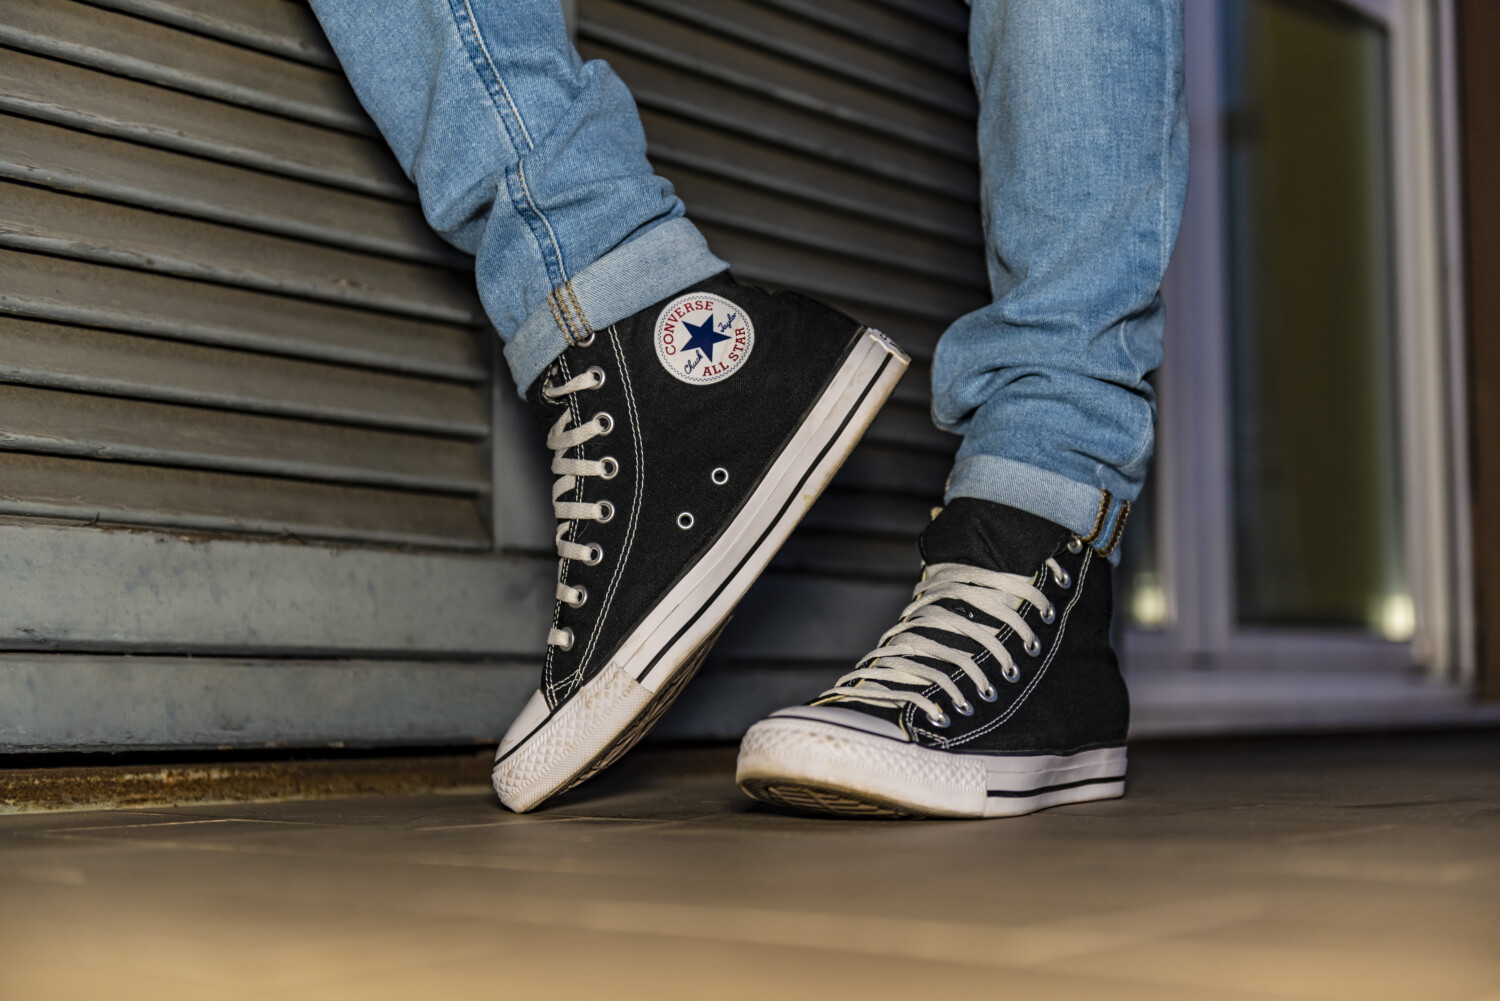 How to Clean White Converse Shoes - Best Ways to Clean Chuck Taylors-saigonsouth.com.vn